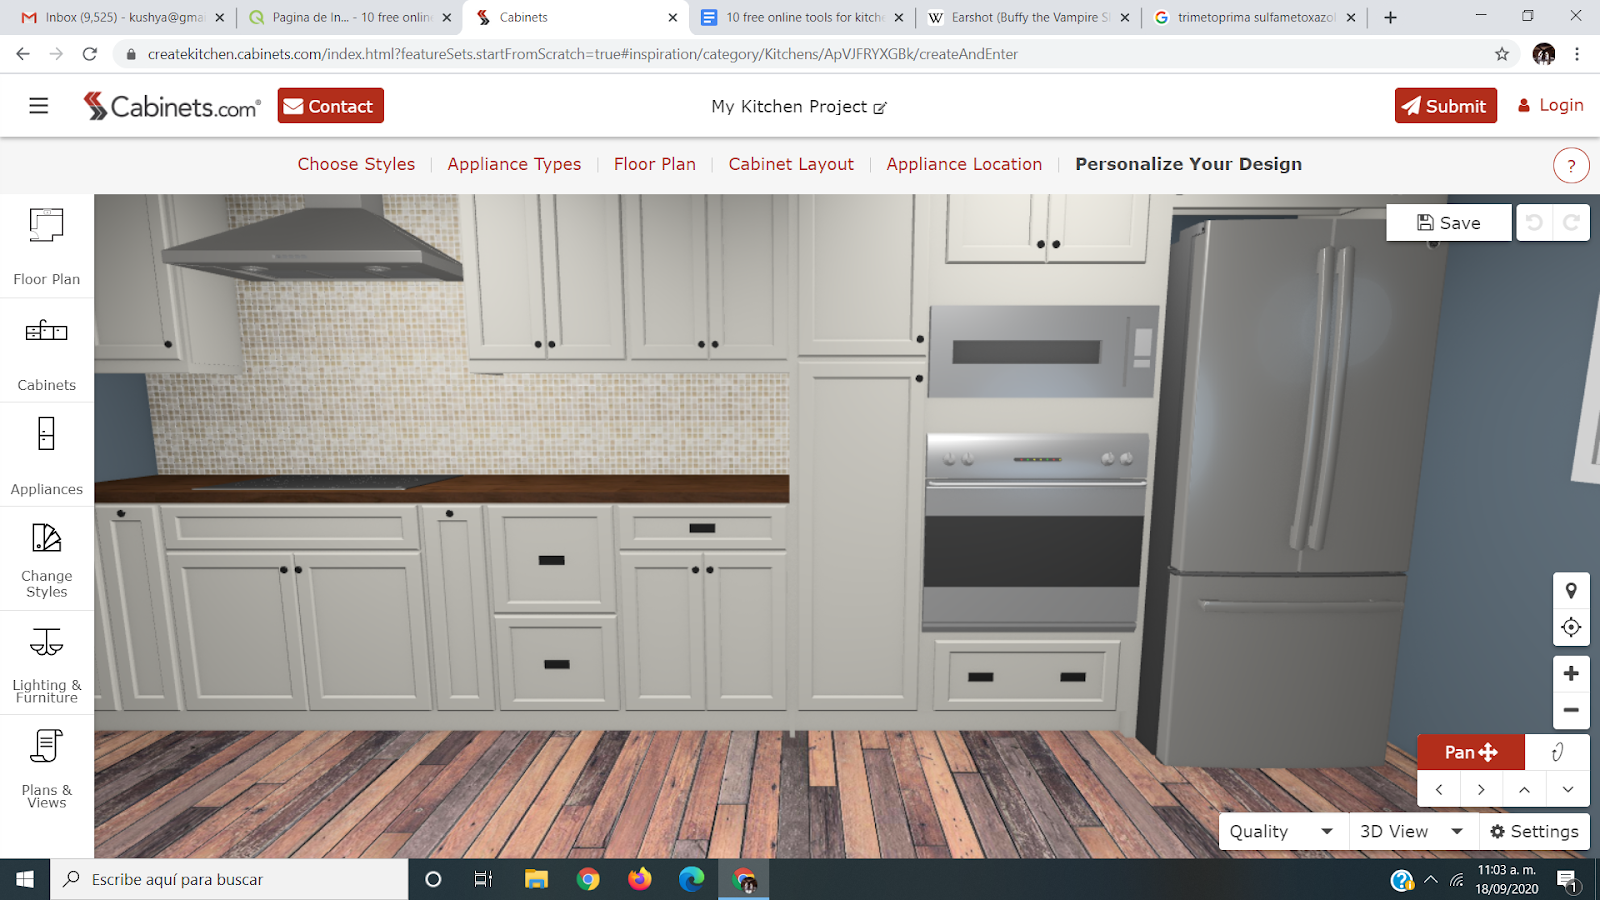 18 free online tools for kitchen design – 18D Really